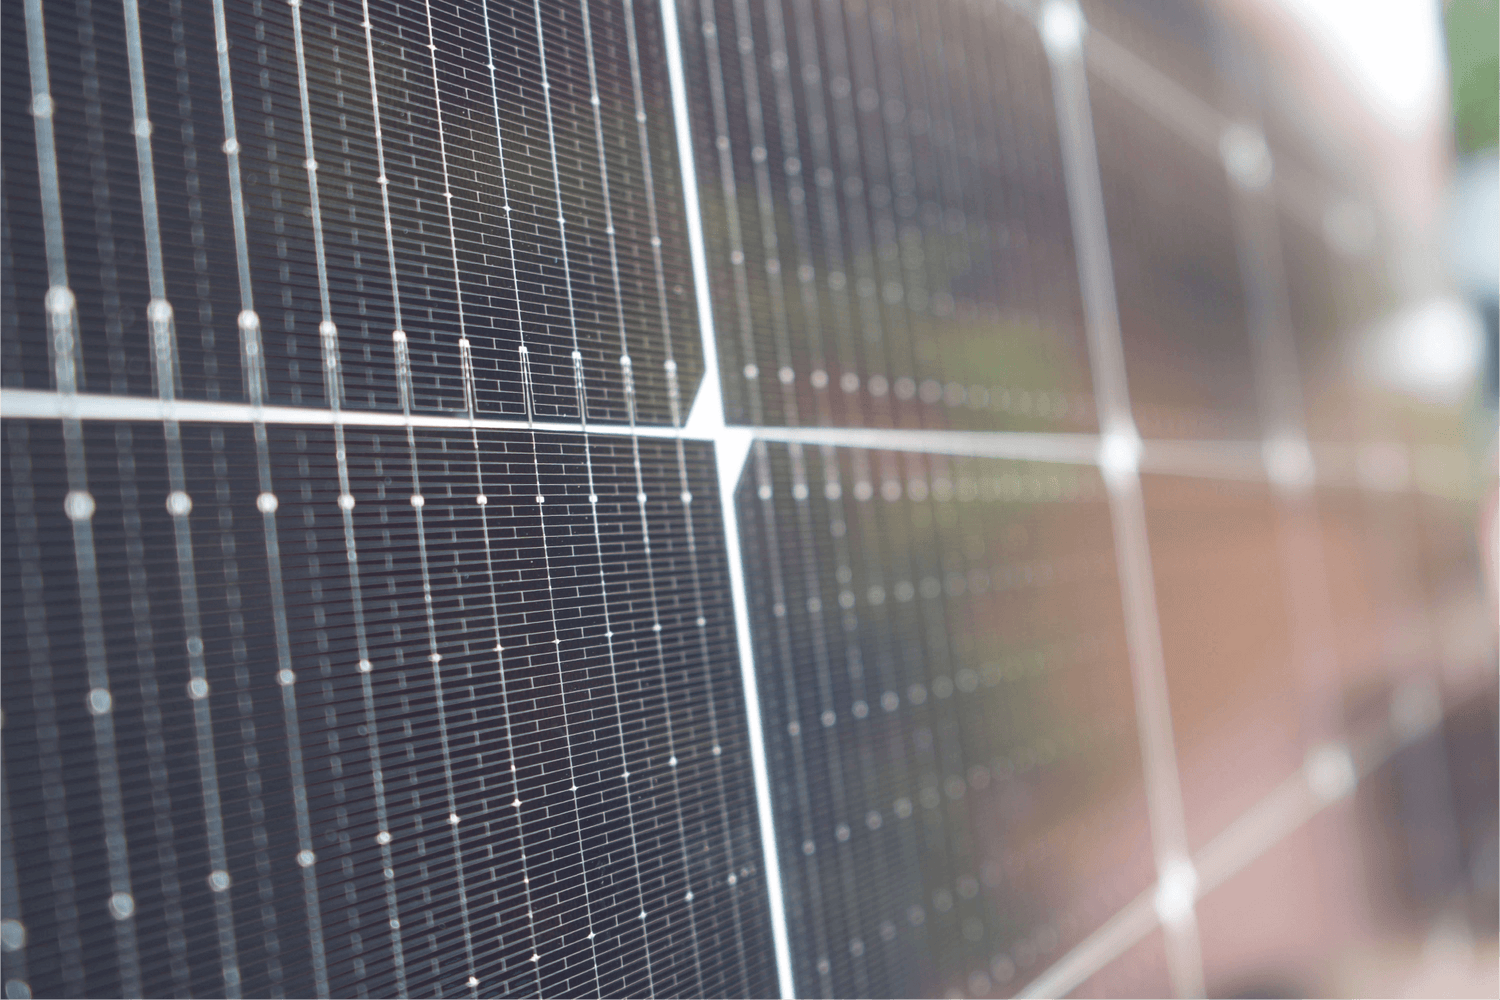 A detailed view of a solar panel, capturing its intricate design and the reflection of sunlight on its surface.